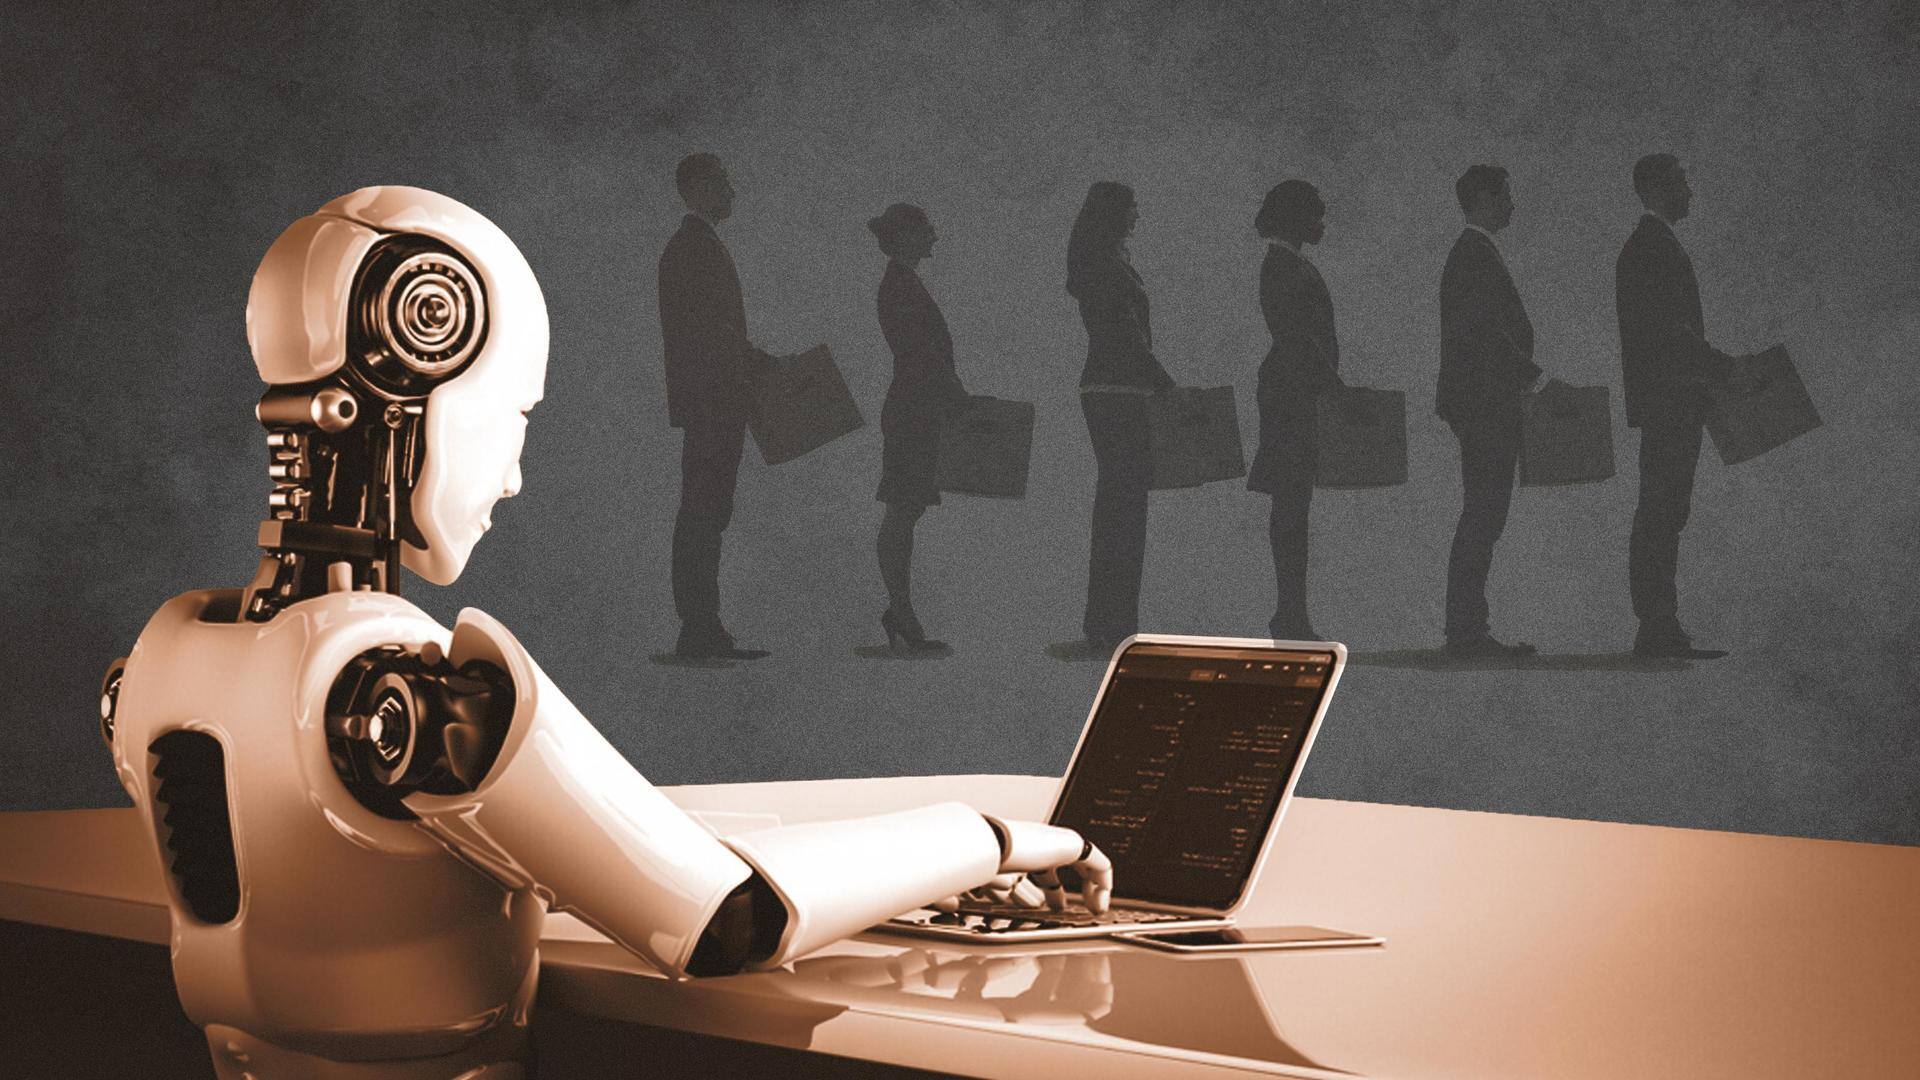 Around 4,000 job losses in May due to AI: Report